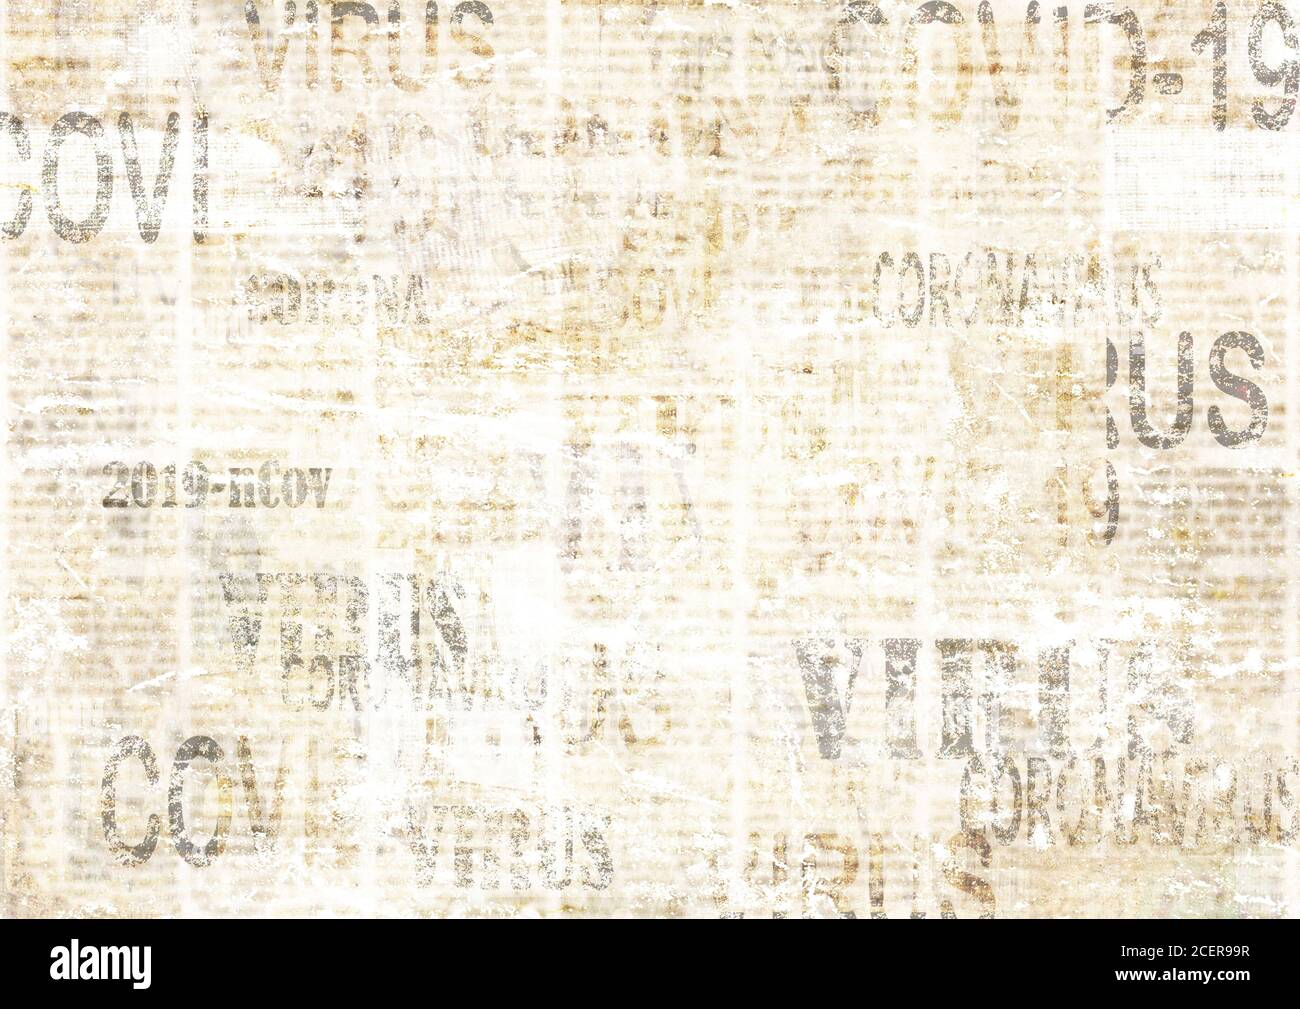 Coronavirus Covid-19 news scratched grunge newspaper old paper background. Blurred newspapers corona virus texture. Grey sepia beige collage textured Stock Photo